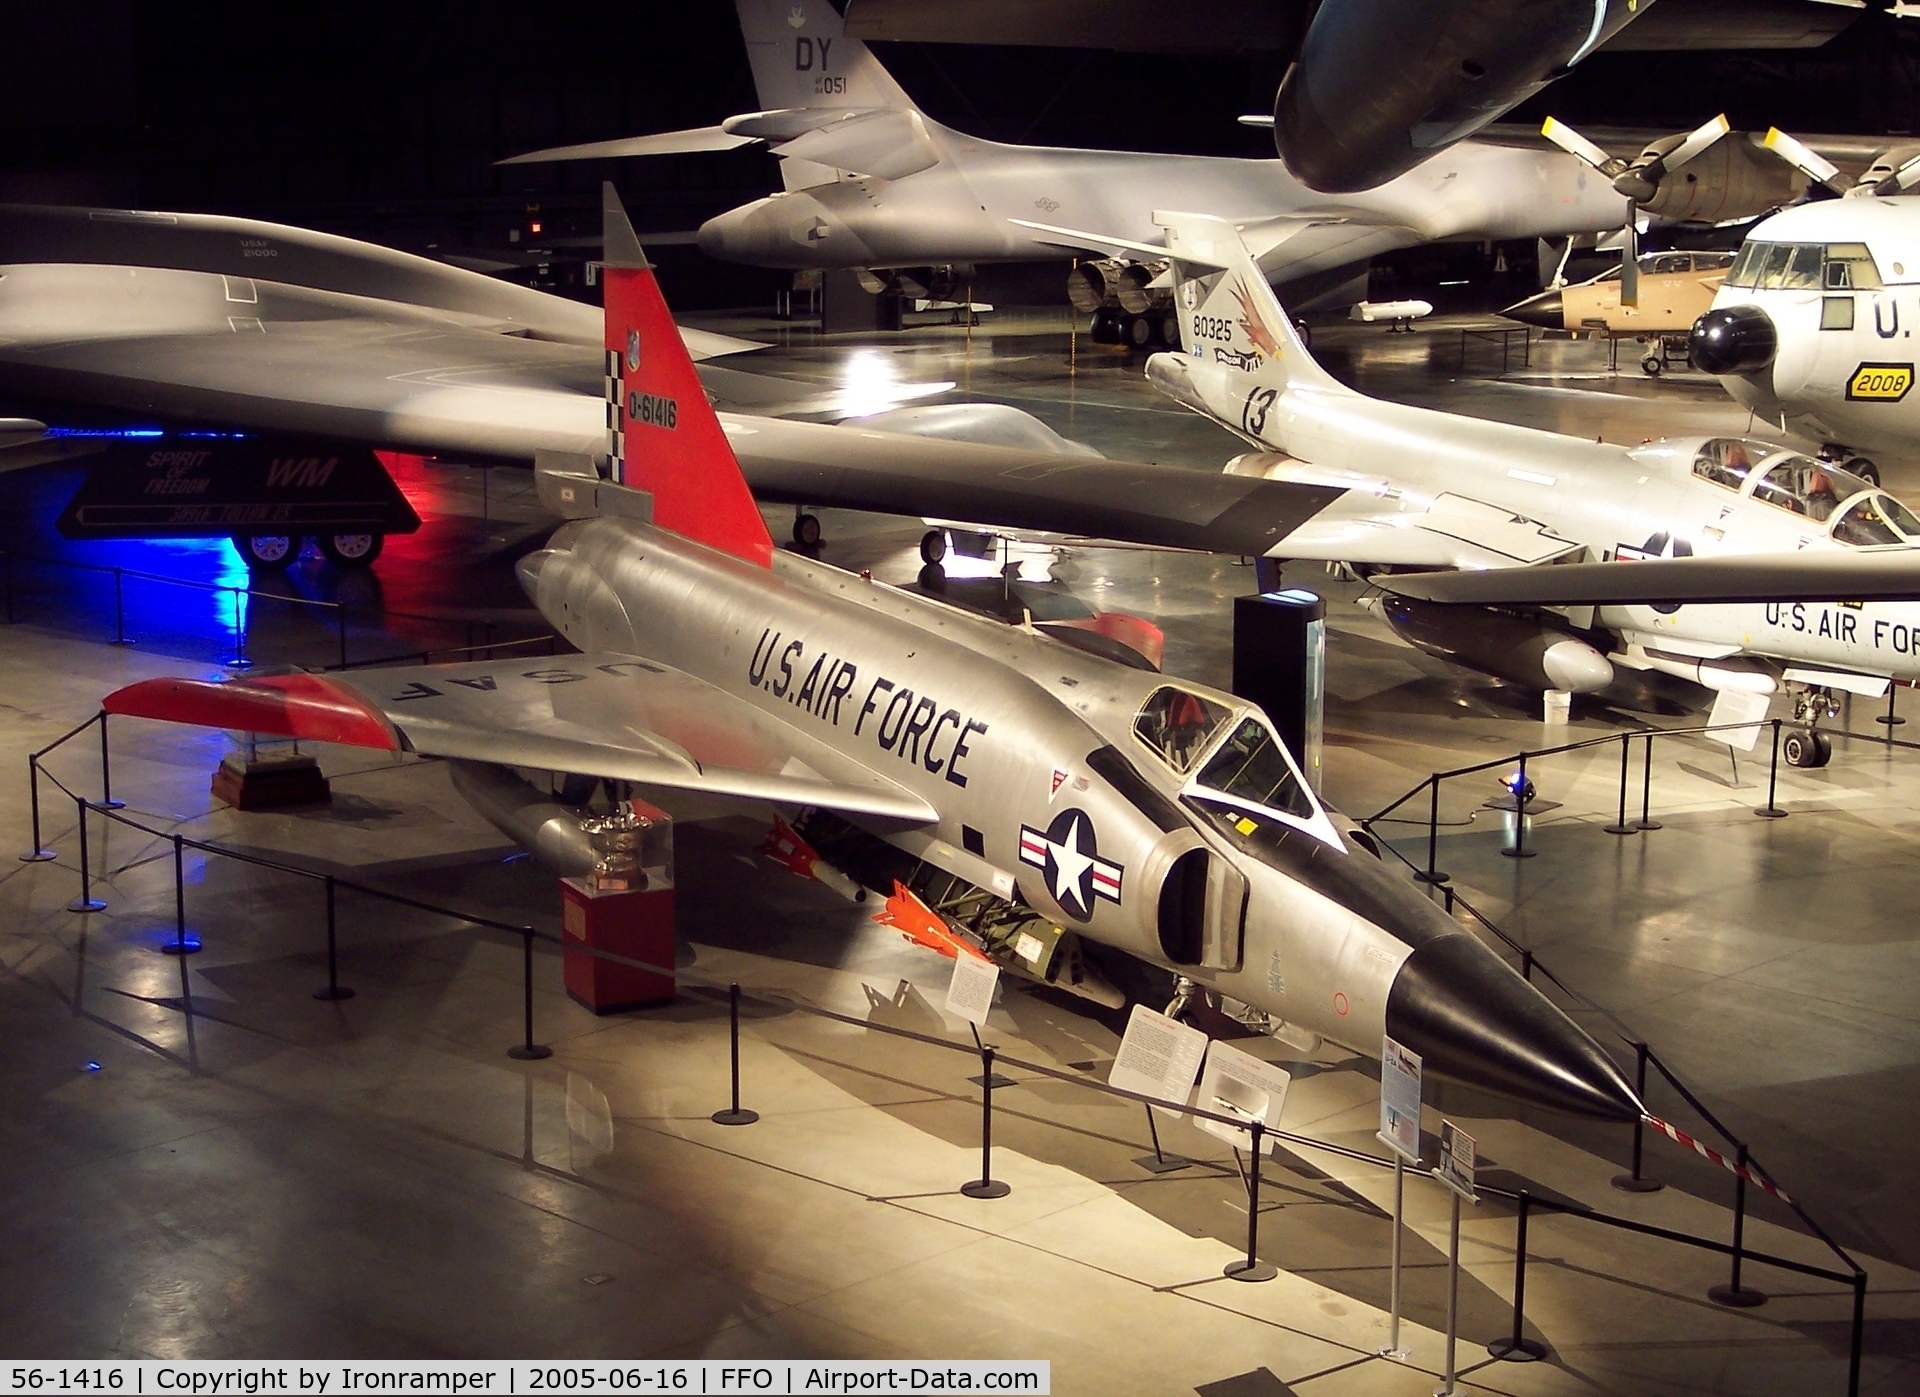 56-1416, 1956 Convair F-102A Delta Dagger C/N 8-10-363, “Delta Dagger” The F-102A on display served the 57th Fighter-Interceptor Squadron in Iceland and was one of the first USAF aircraft to intercept and convoy a Soviet Tu-20 